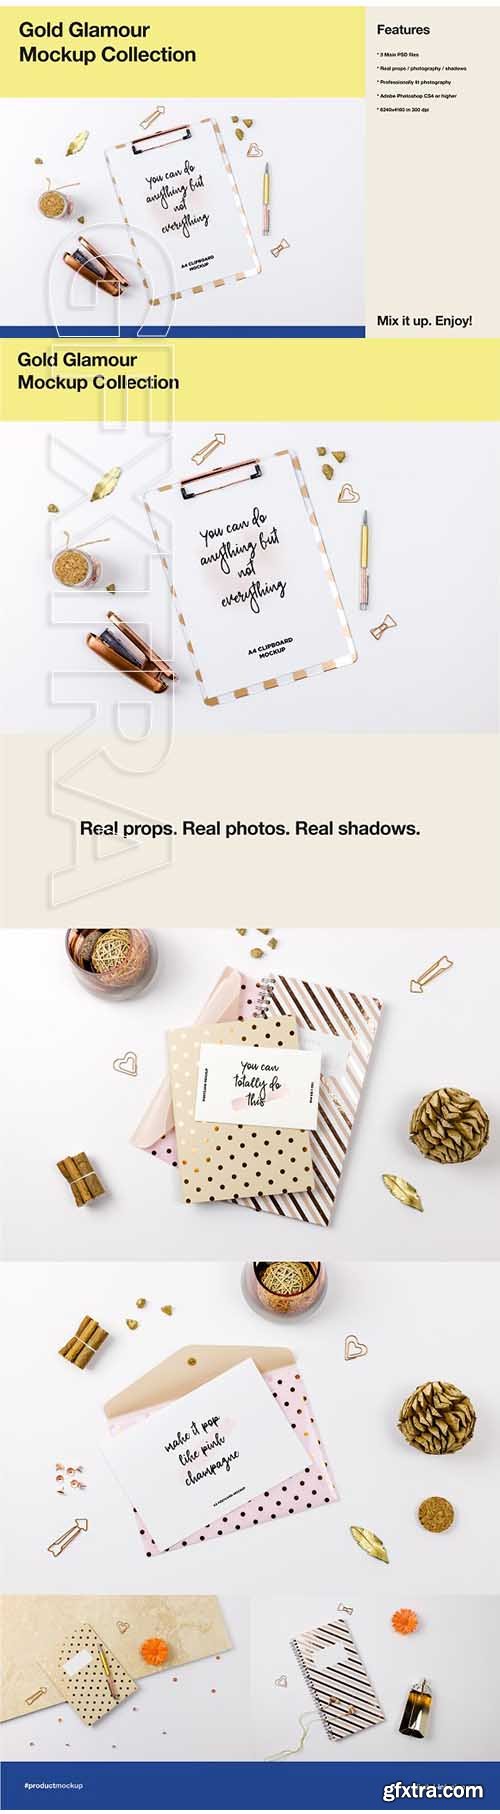 CreativeMarket - Gold Glamour Mockup Collection 2412934